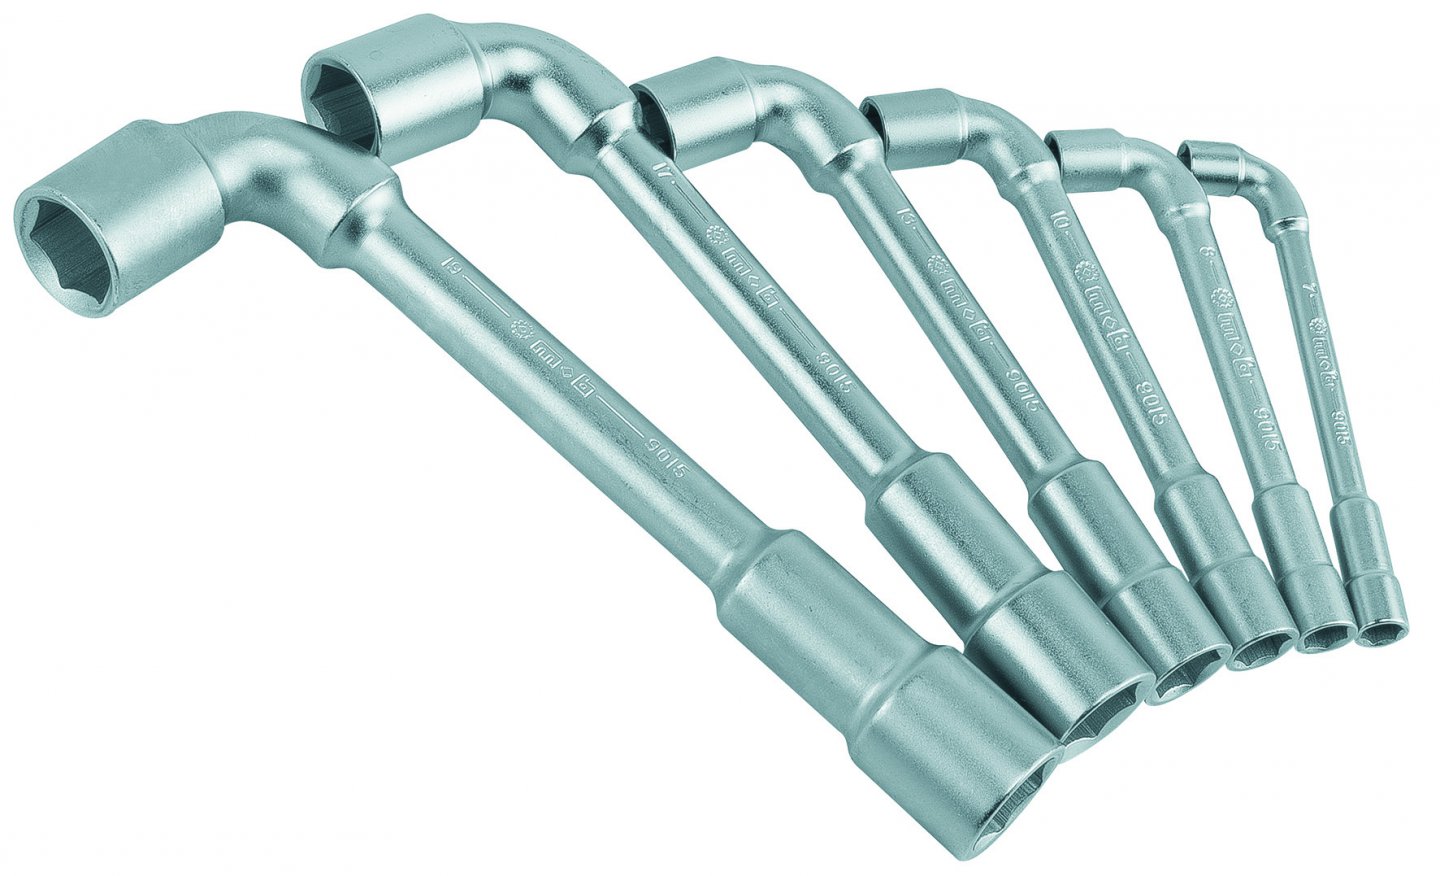 JEUX CLE A PIPE 12PCS KING TONY - GAMA OUTILLAGE